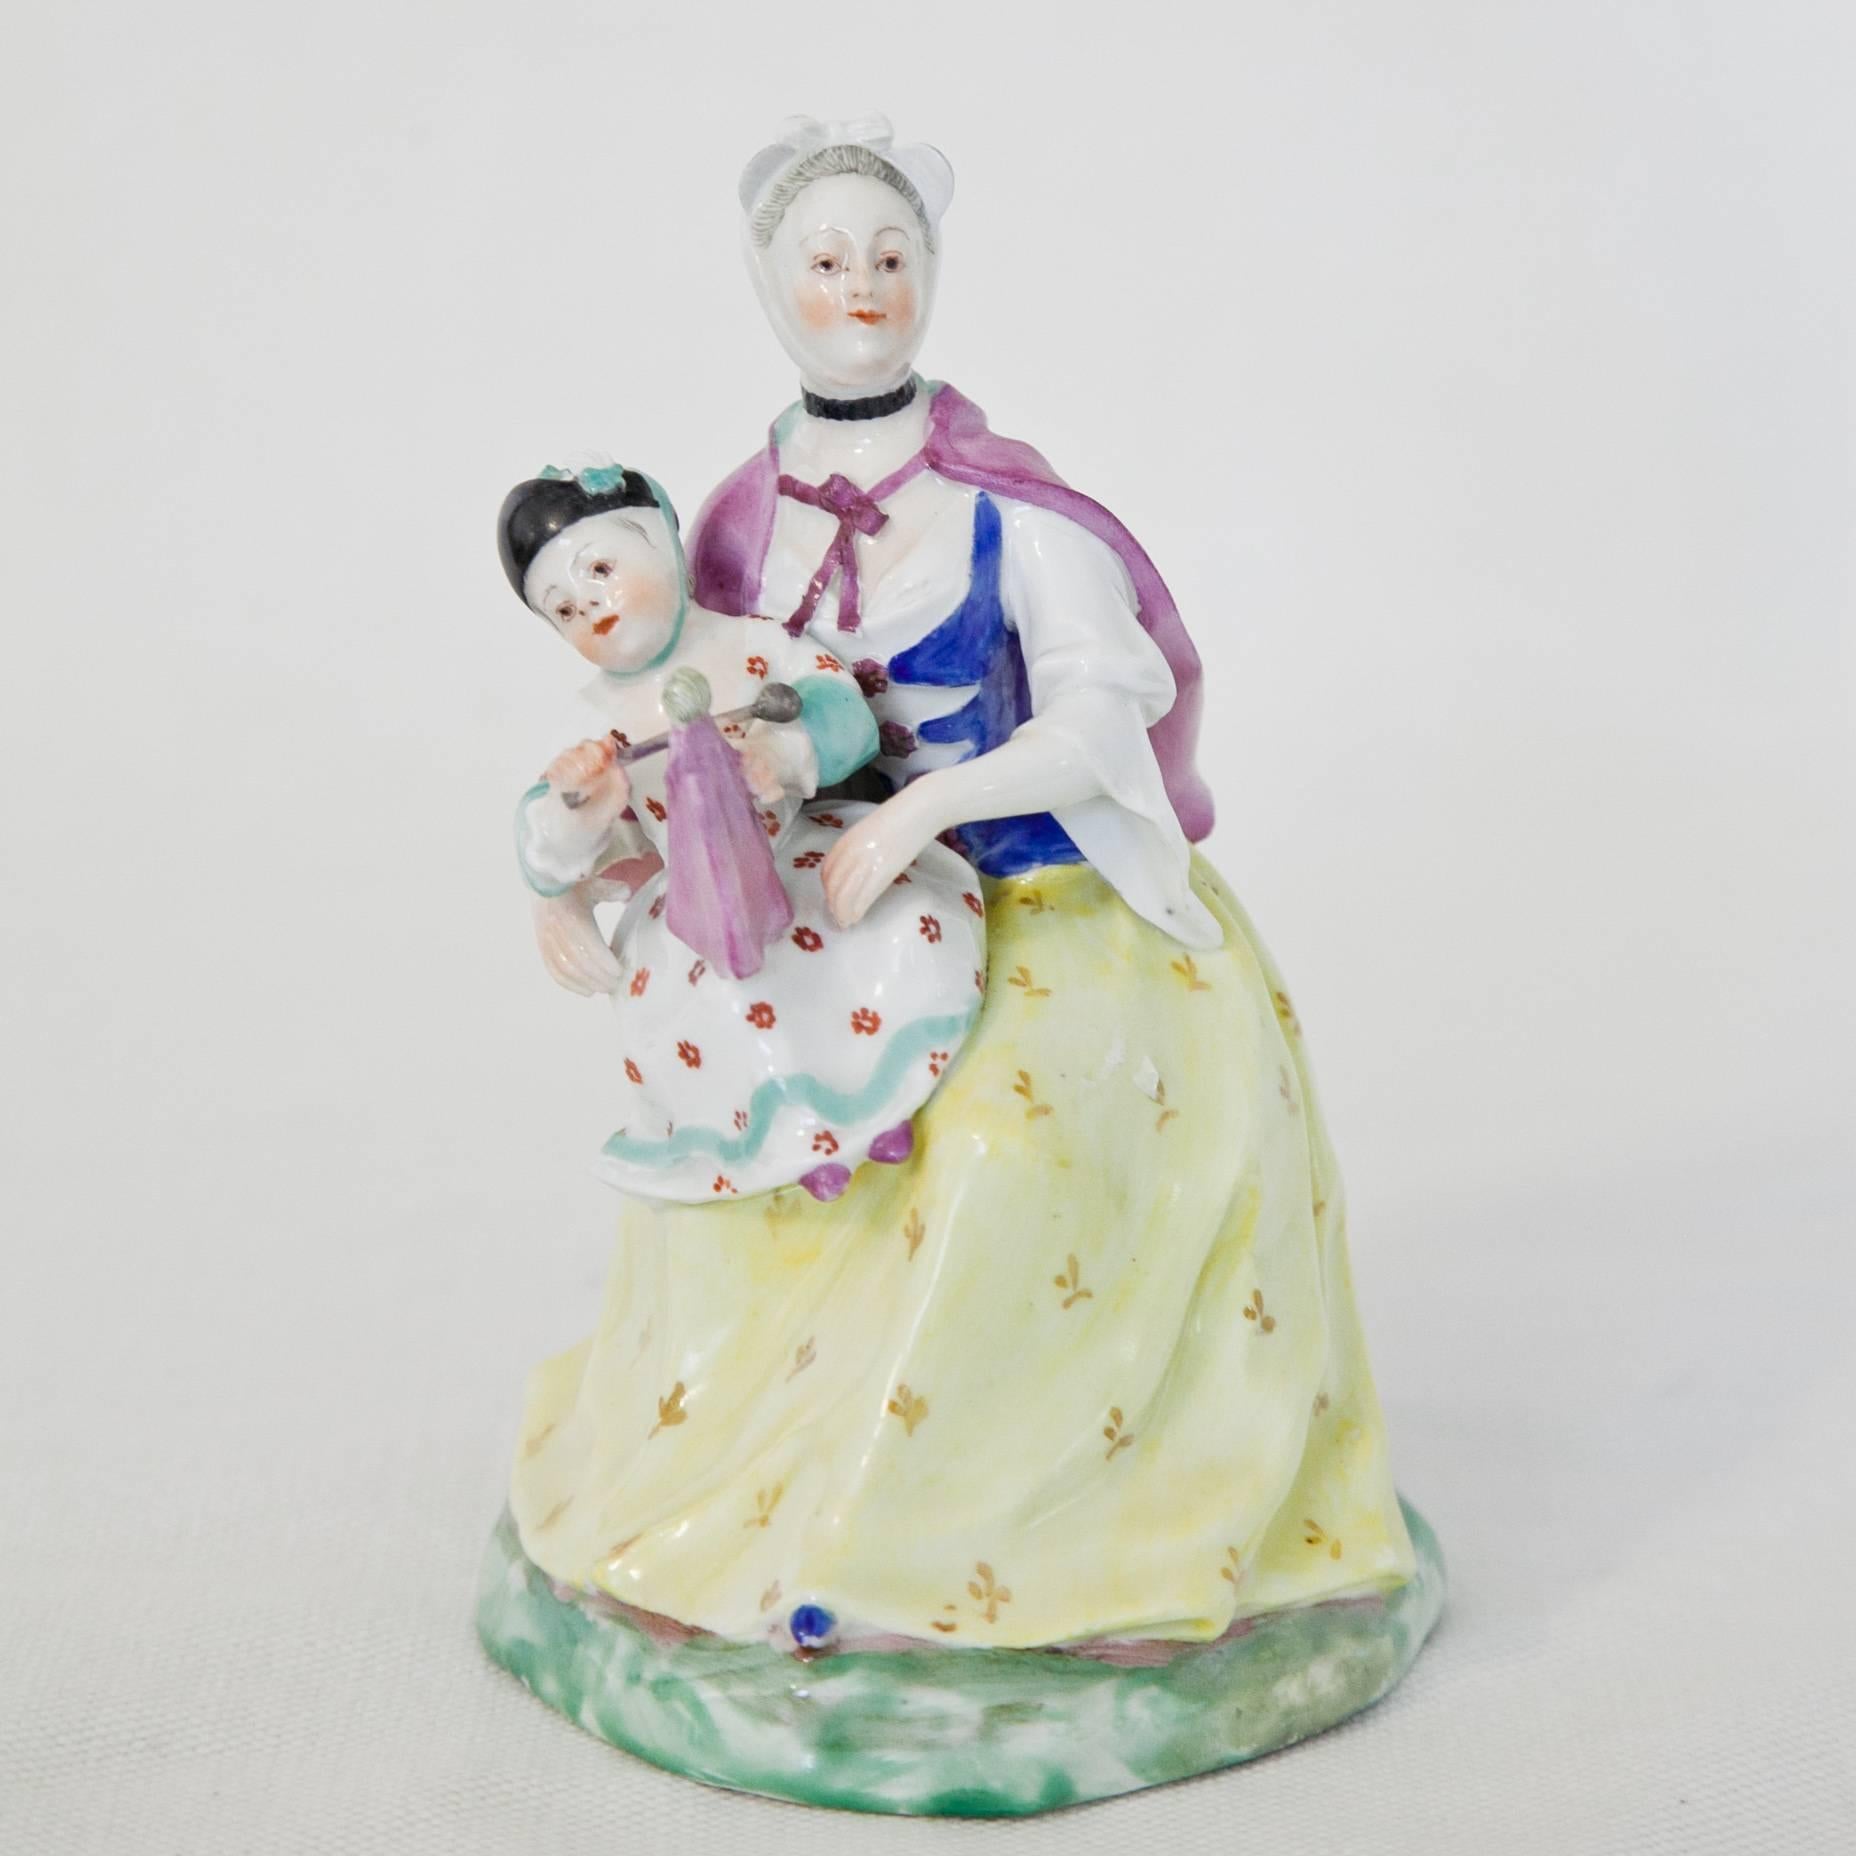 Porcelain Mother with Child, Vienna, 18th Century